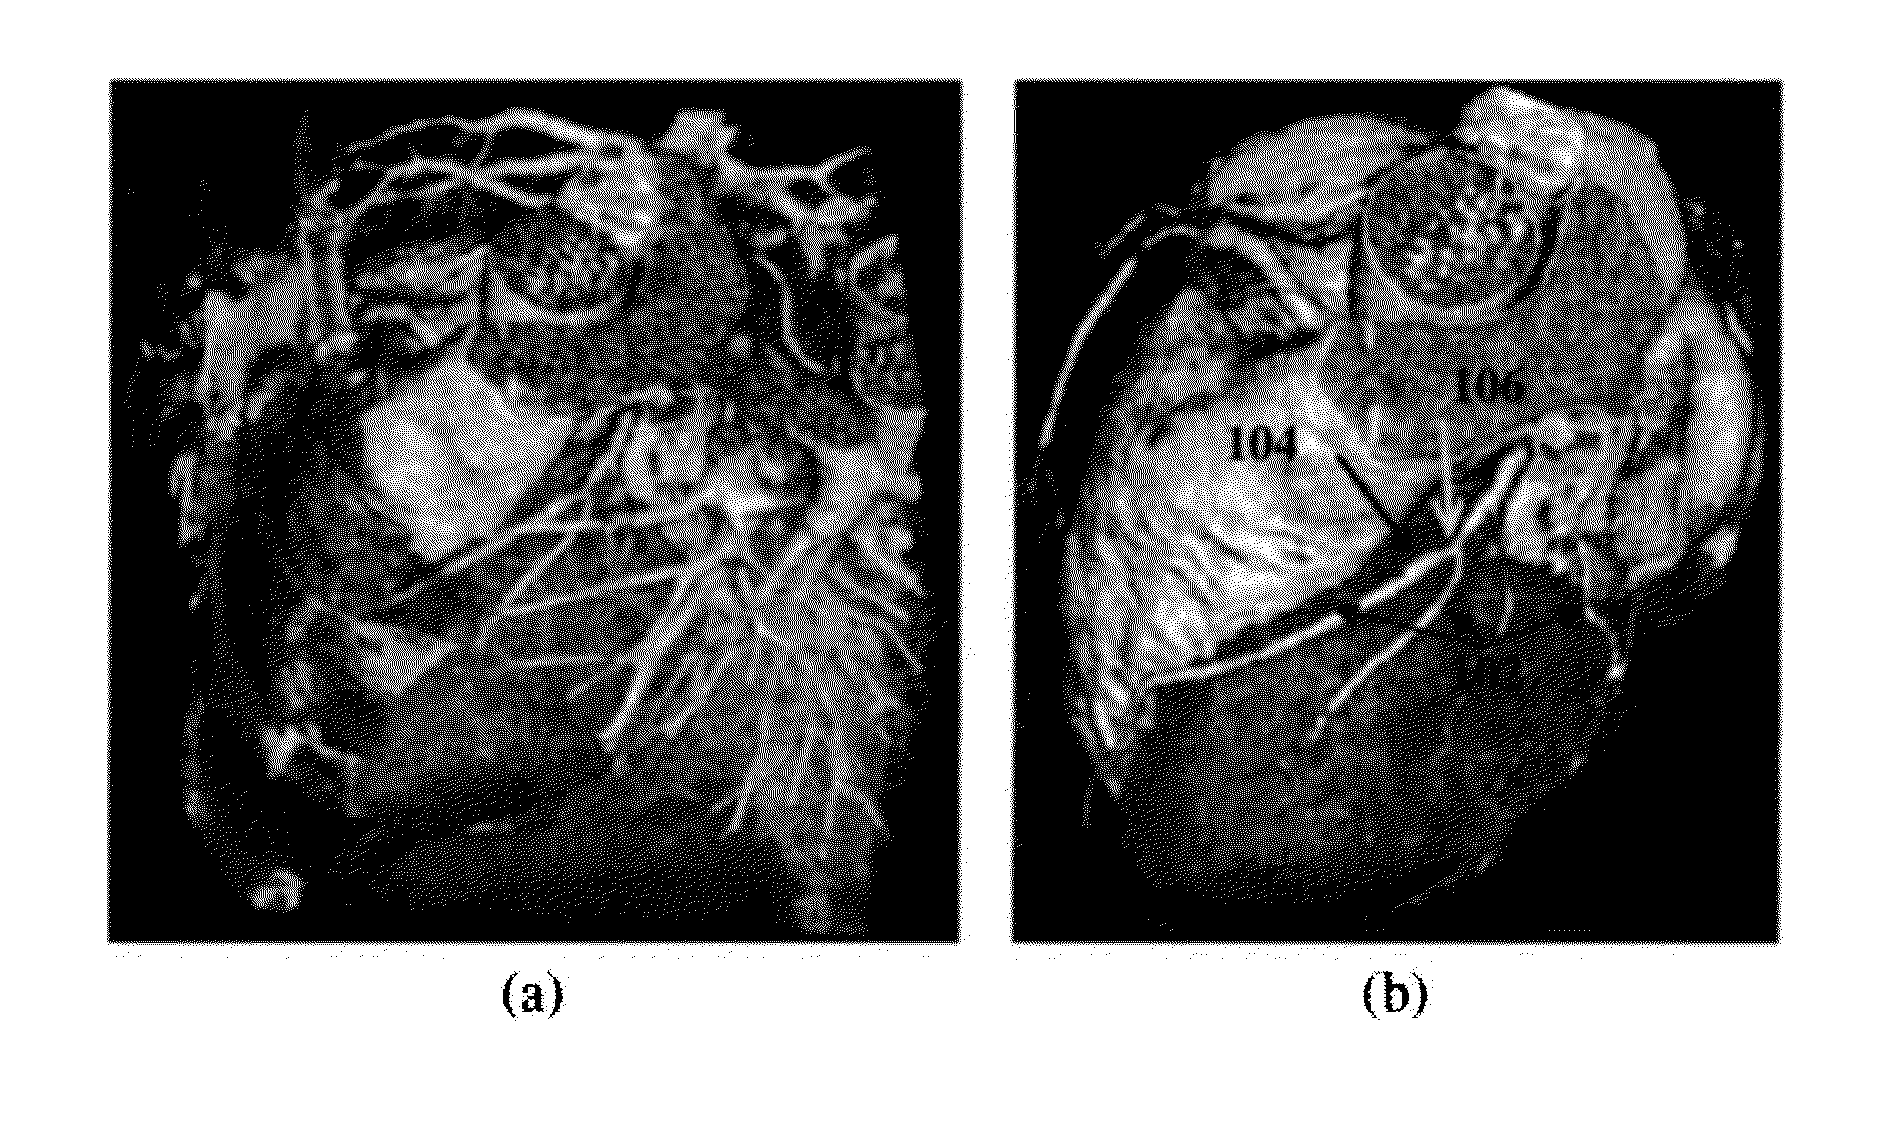 Method and System for Heart Isolation in Cardiac Computed Tomography Volumes for Patients with Coronary Artery Bypasses